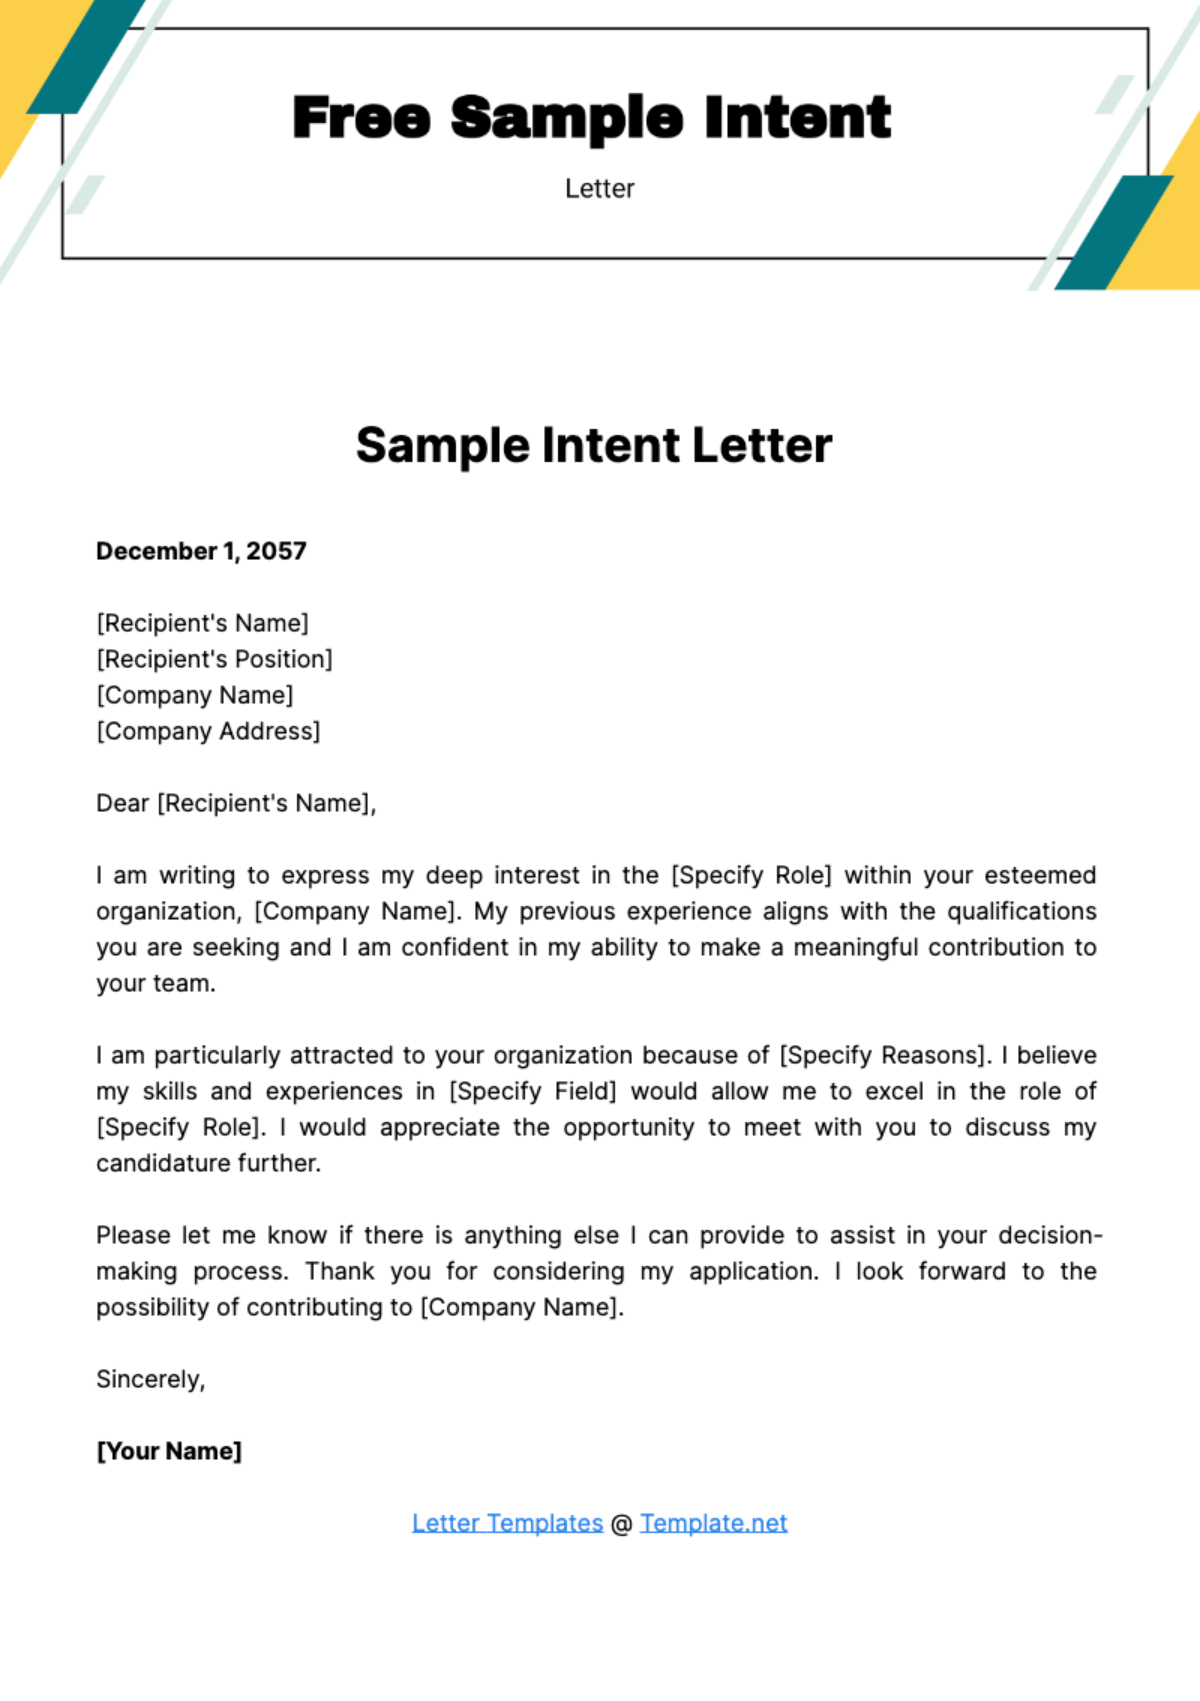 Free Sample Intent Letter Template